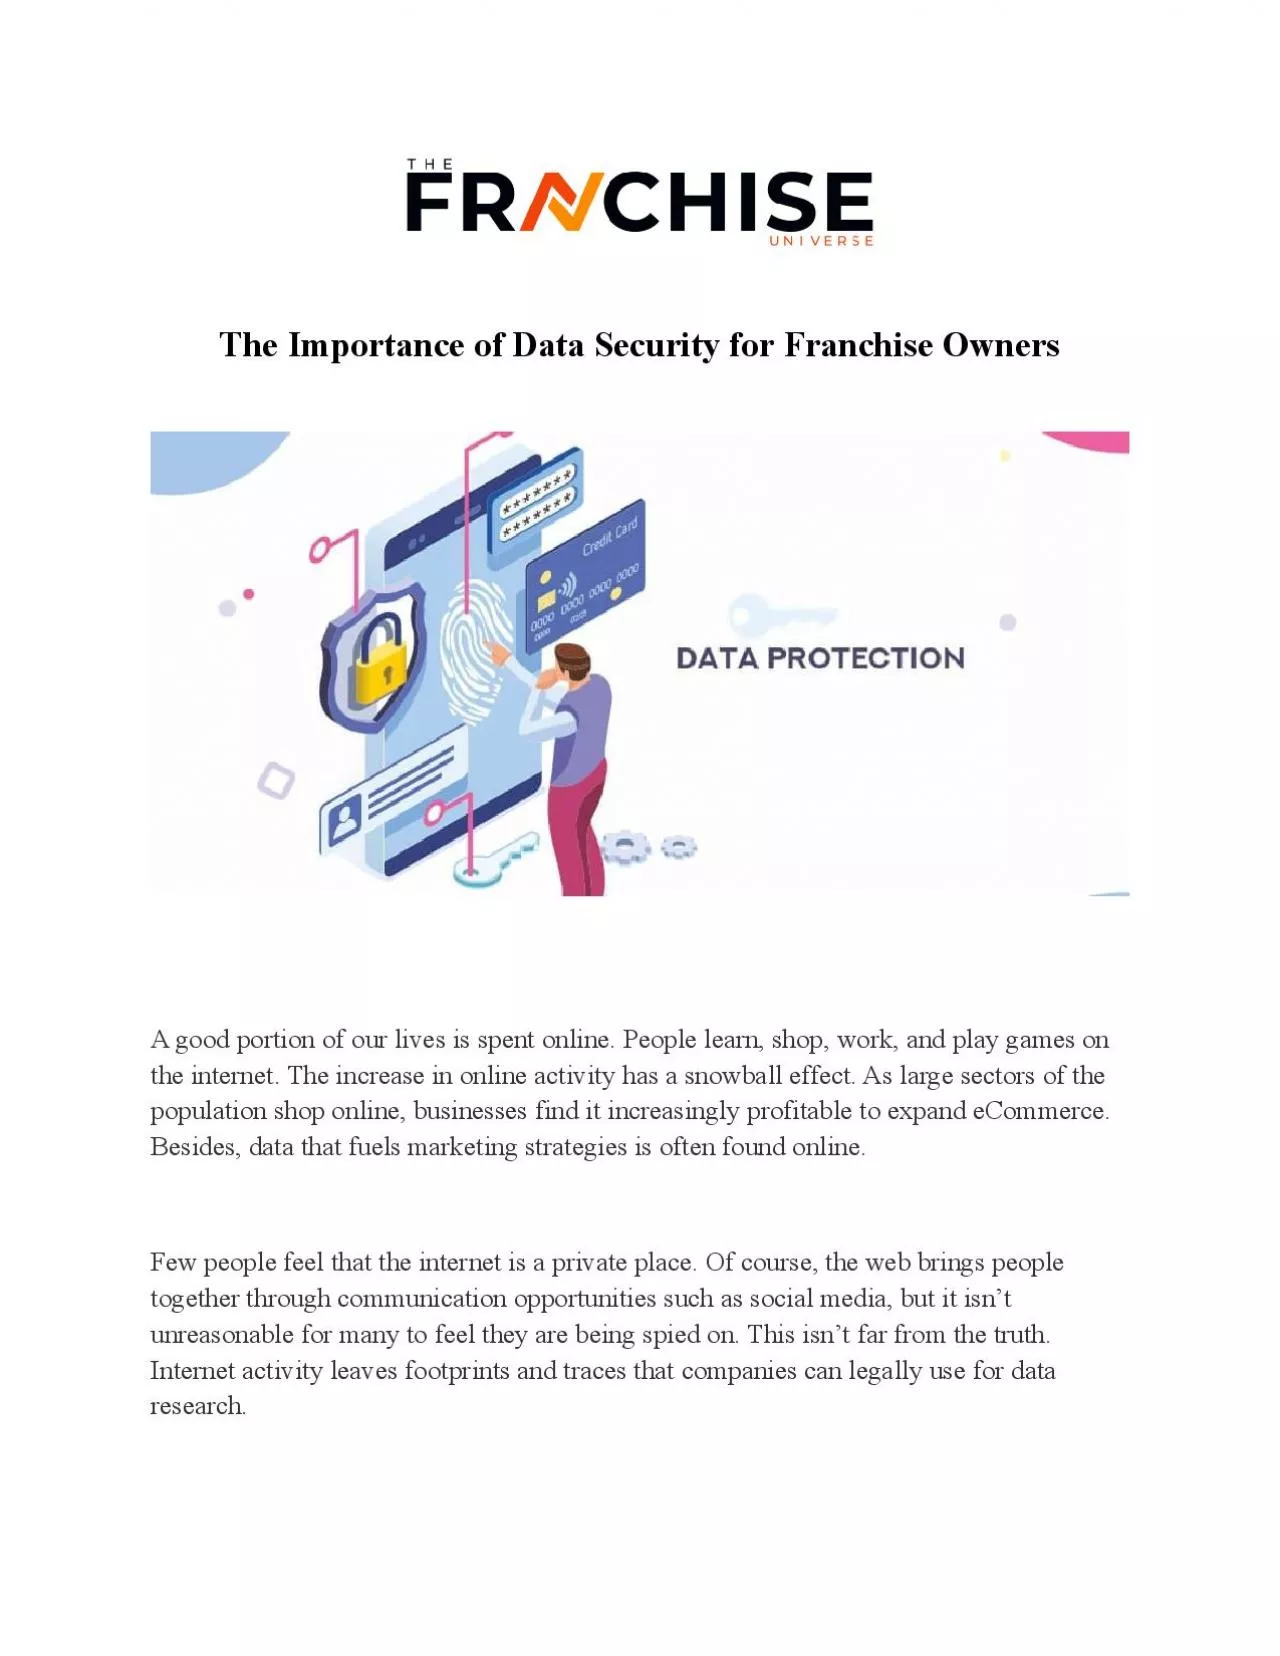 The Importance of Data Security for Franchise Owners